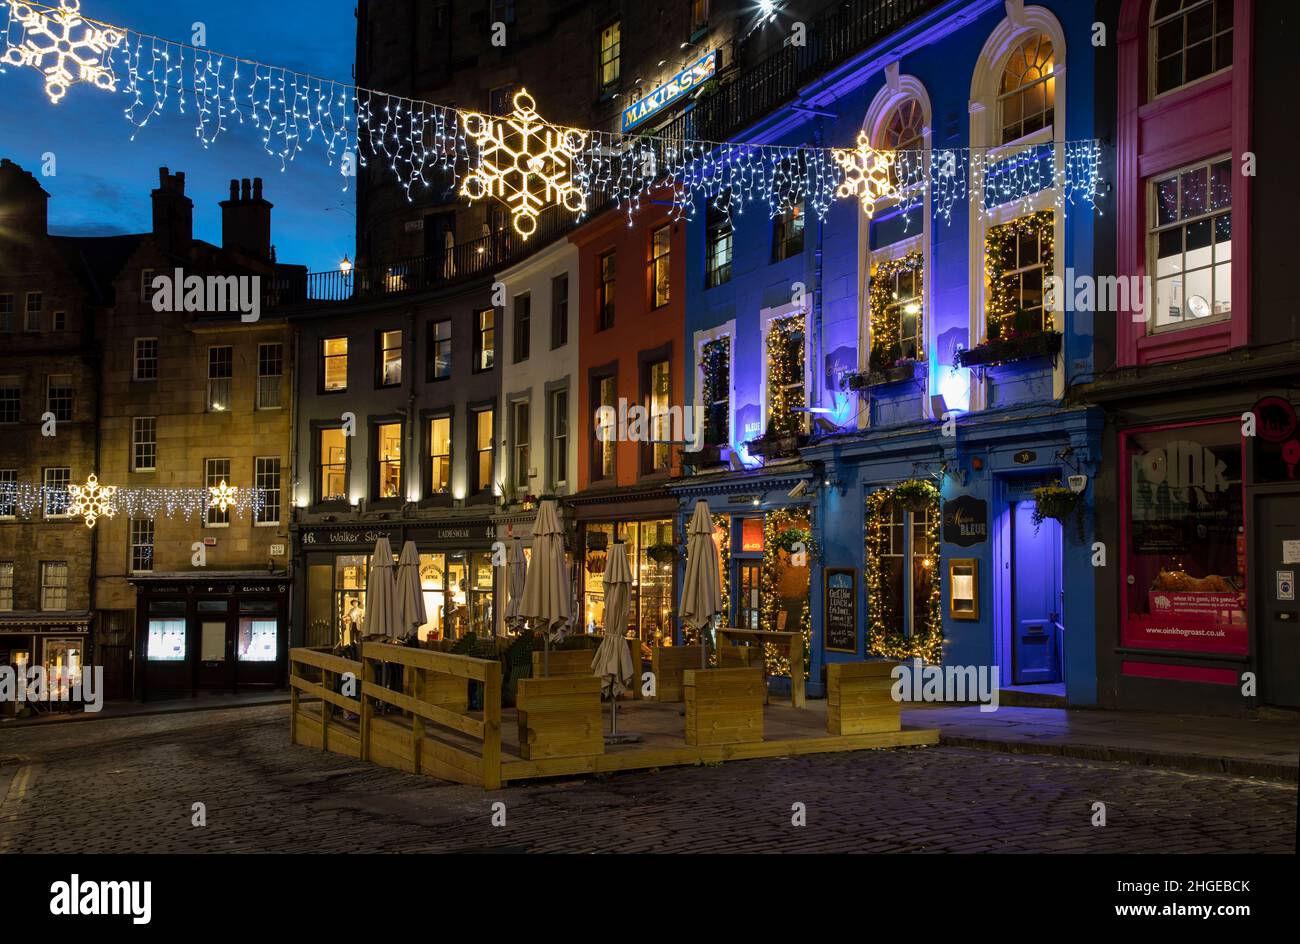 Edinburgh, UK - January 4th, 2022: Victoria Street is at the pretty part of Old Town Edinburgh with a long stretch of colourful storefronts and restau Stock Photo